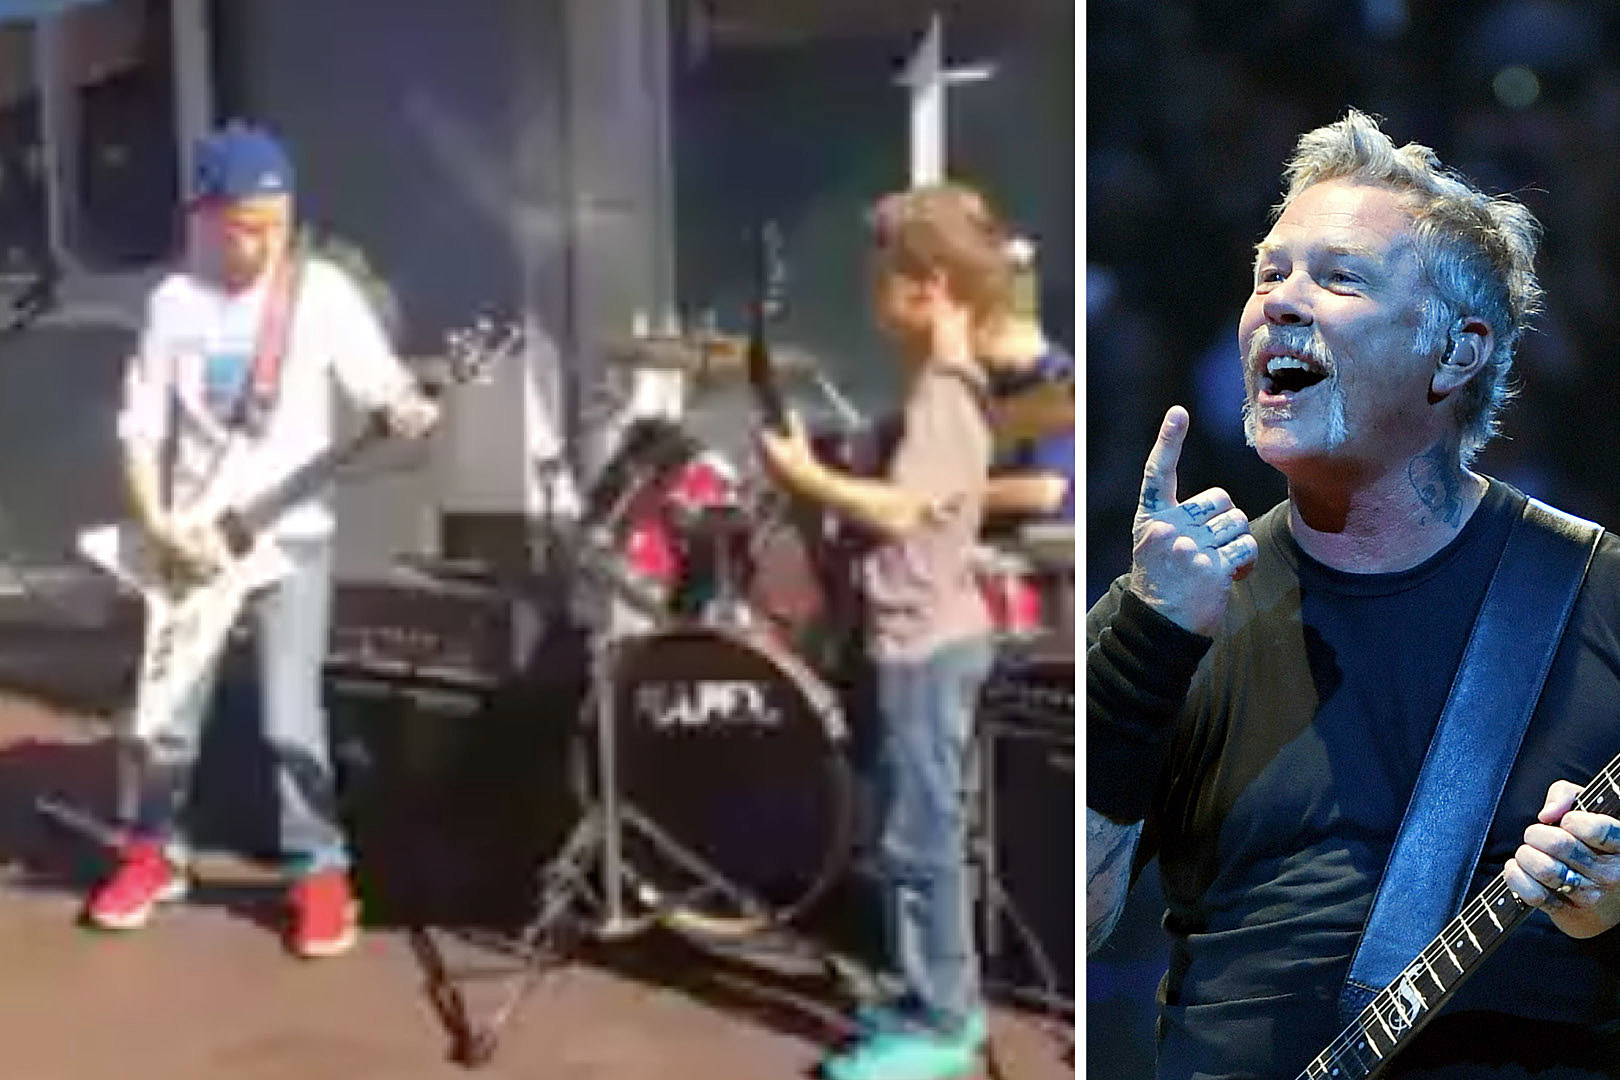 Kid Band Plays Metallica’s ‘Eye of the Beholder’ on the Street